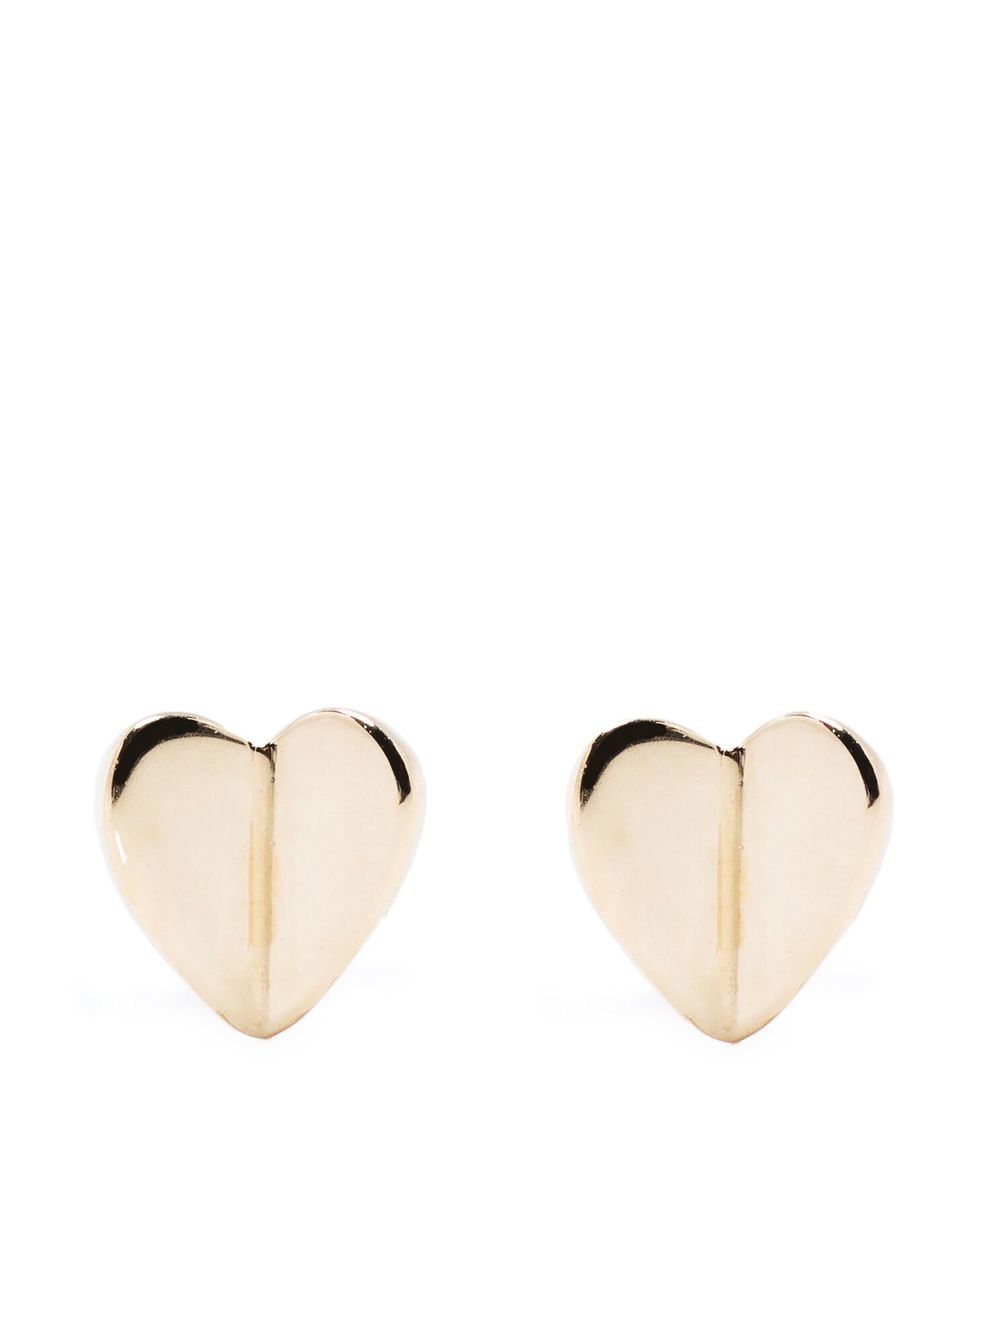 Dinny Hall 10kt Yellow Gold Folded Hearts Stud Earrings